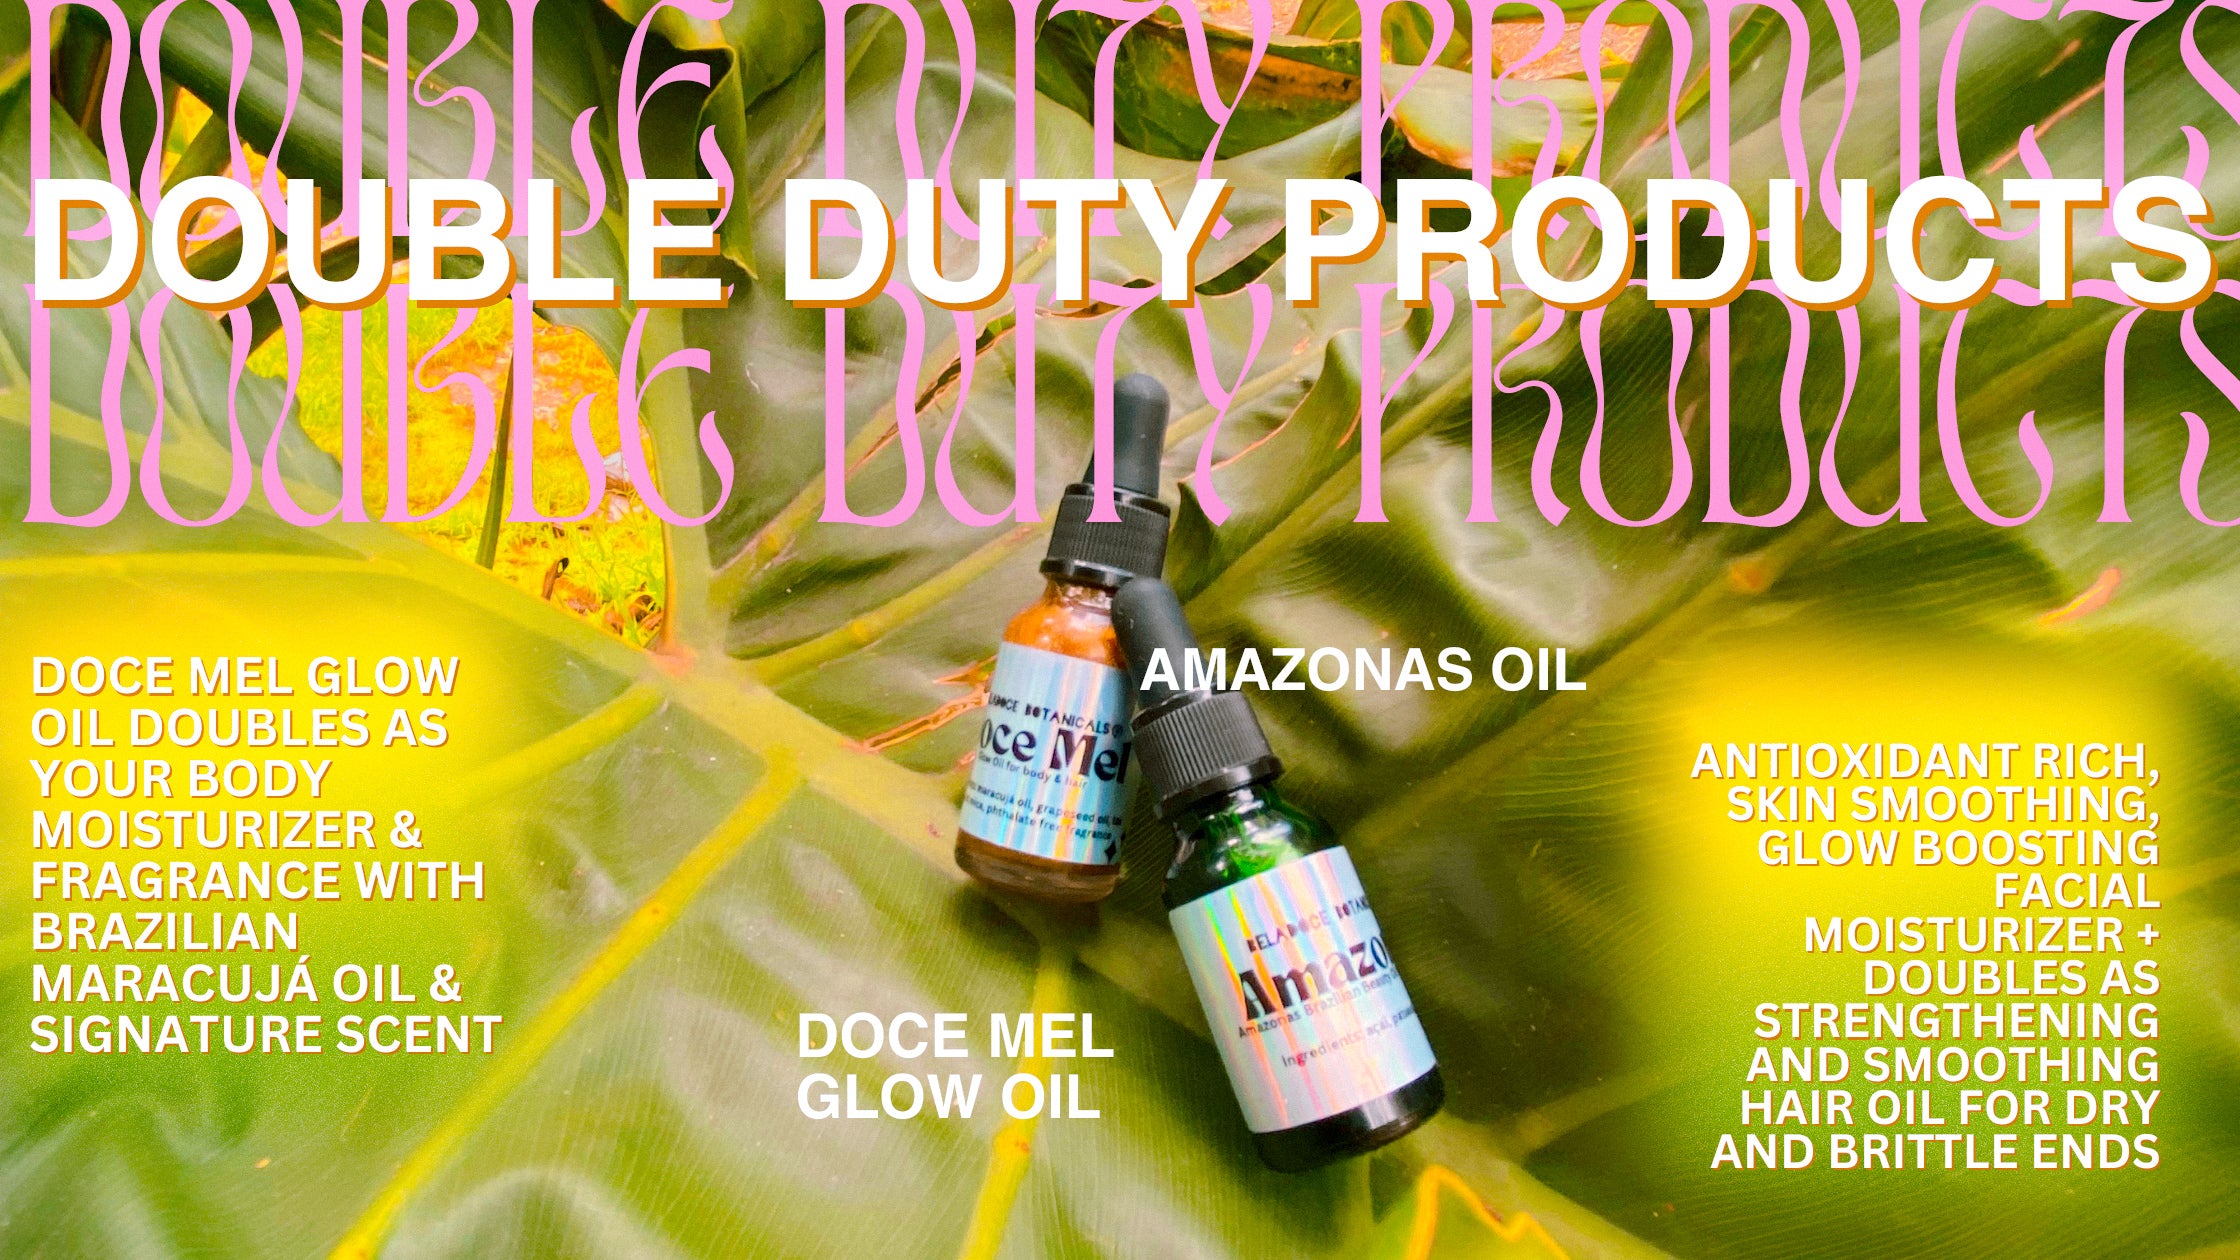 Double duty products, glowy skin on the go. Beladoce Botanicals Doce Mel Glow Oil doubles as your nourishing body moisturizer & fragrance with Brazilian maracujá oil & delicious lingering signature scent. For those that love luxe skinvare, but also love less steps, and less to carry. Amazonas Brazilian beauty oil, Antioxidant rich, skin smoothing, Glow boosting facial moisturizer + doubles as  strengthening and smoothing hair oil for dry and brittle ends